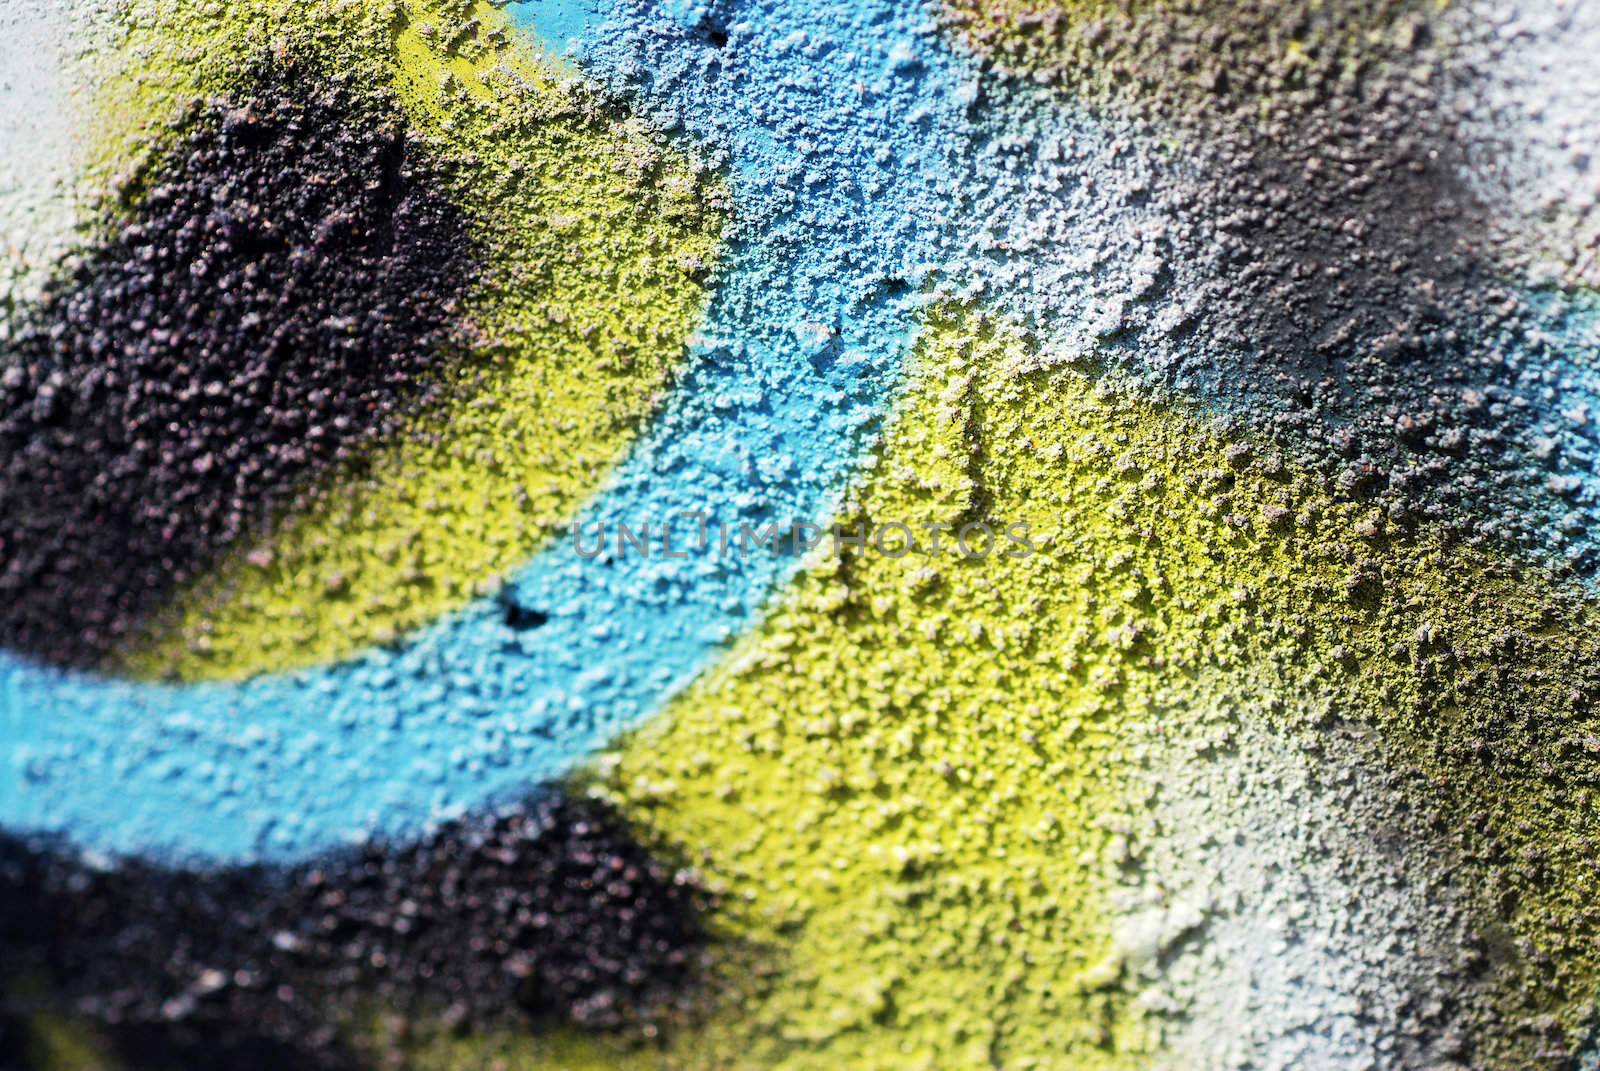 A close up photograph of spray painted graffiti on a textured concrete wall